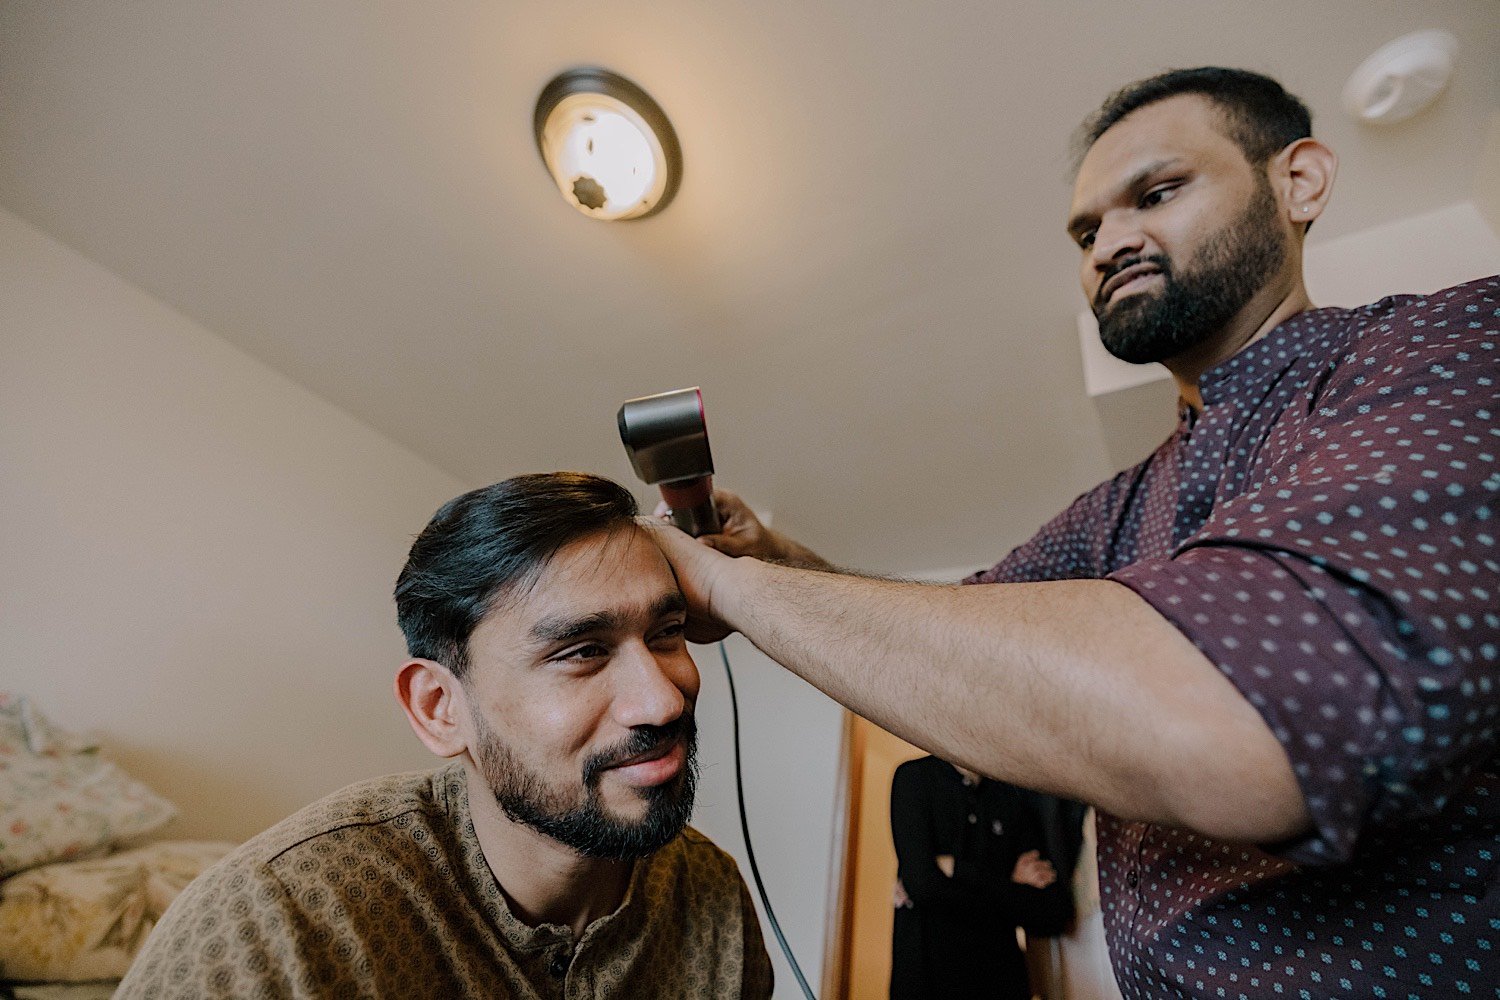 Man giving his friends hair a quick trim as they prepare for a wedding